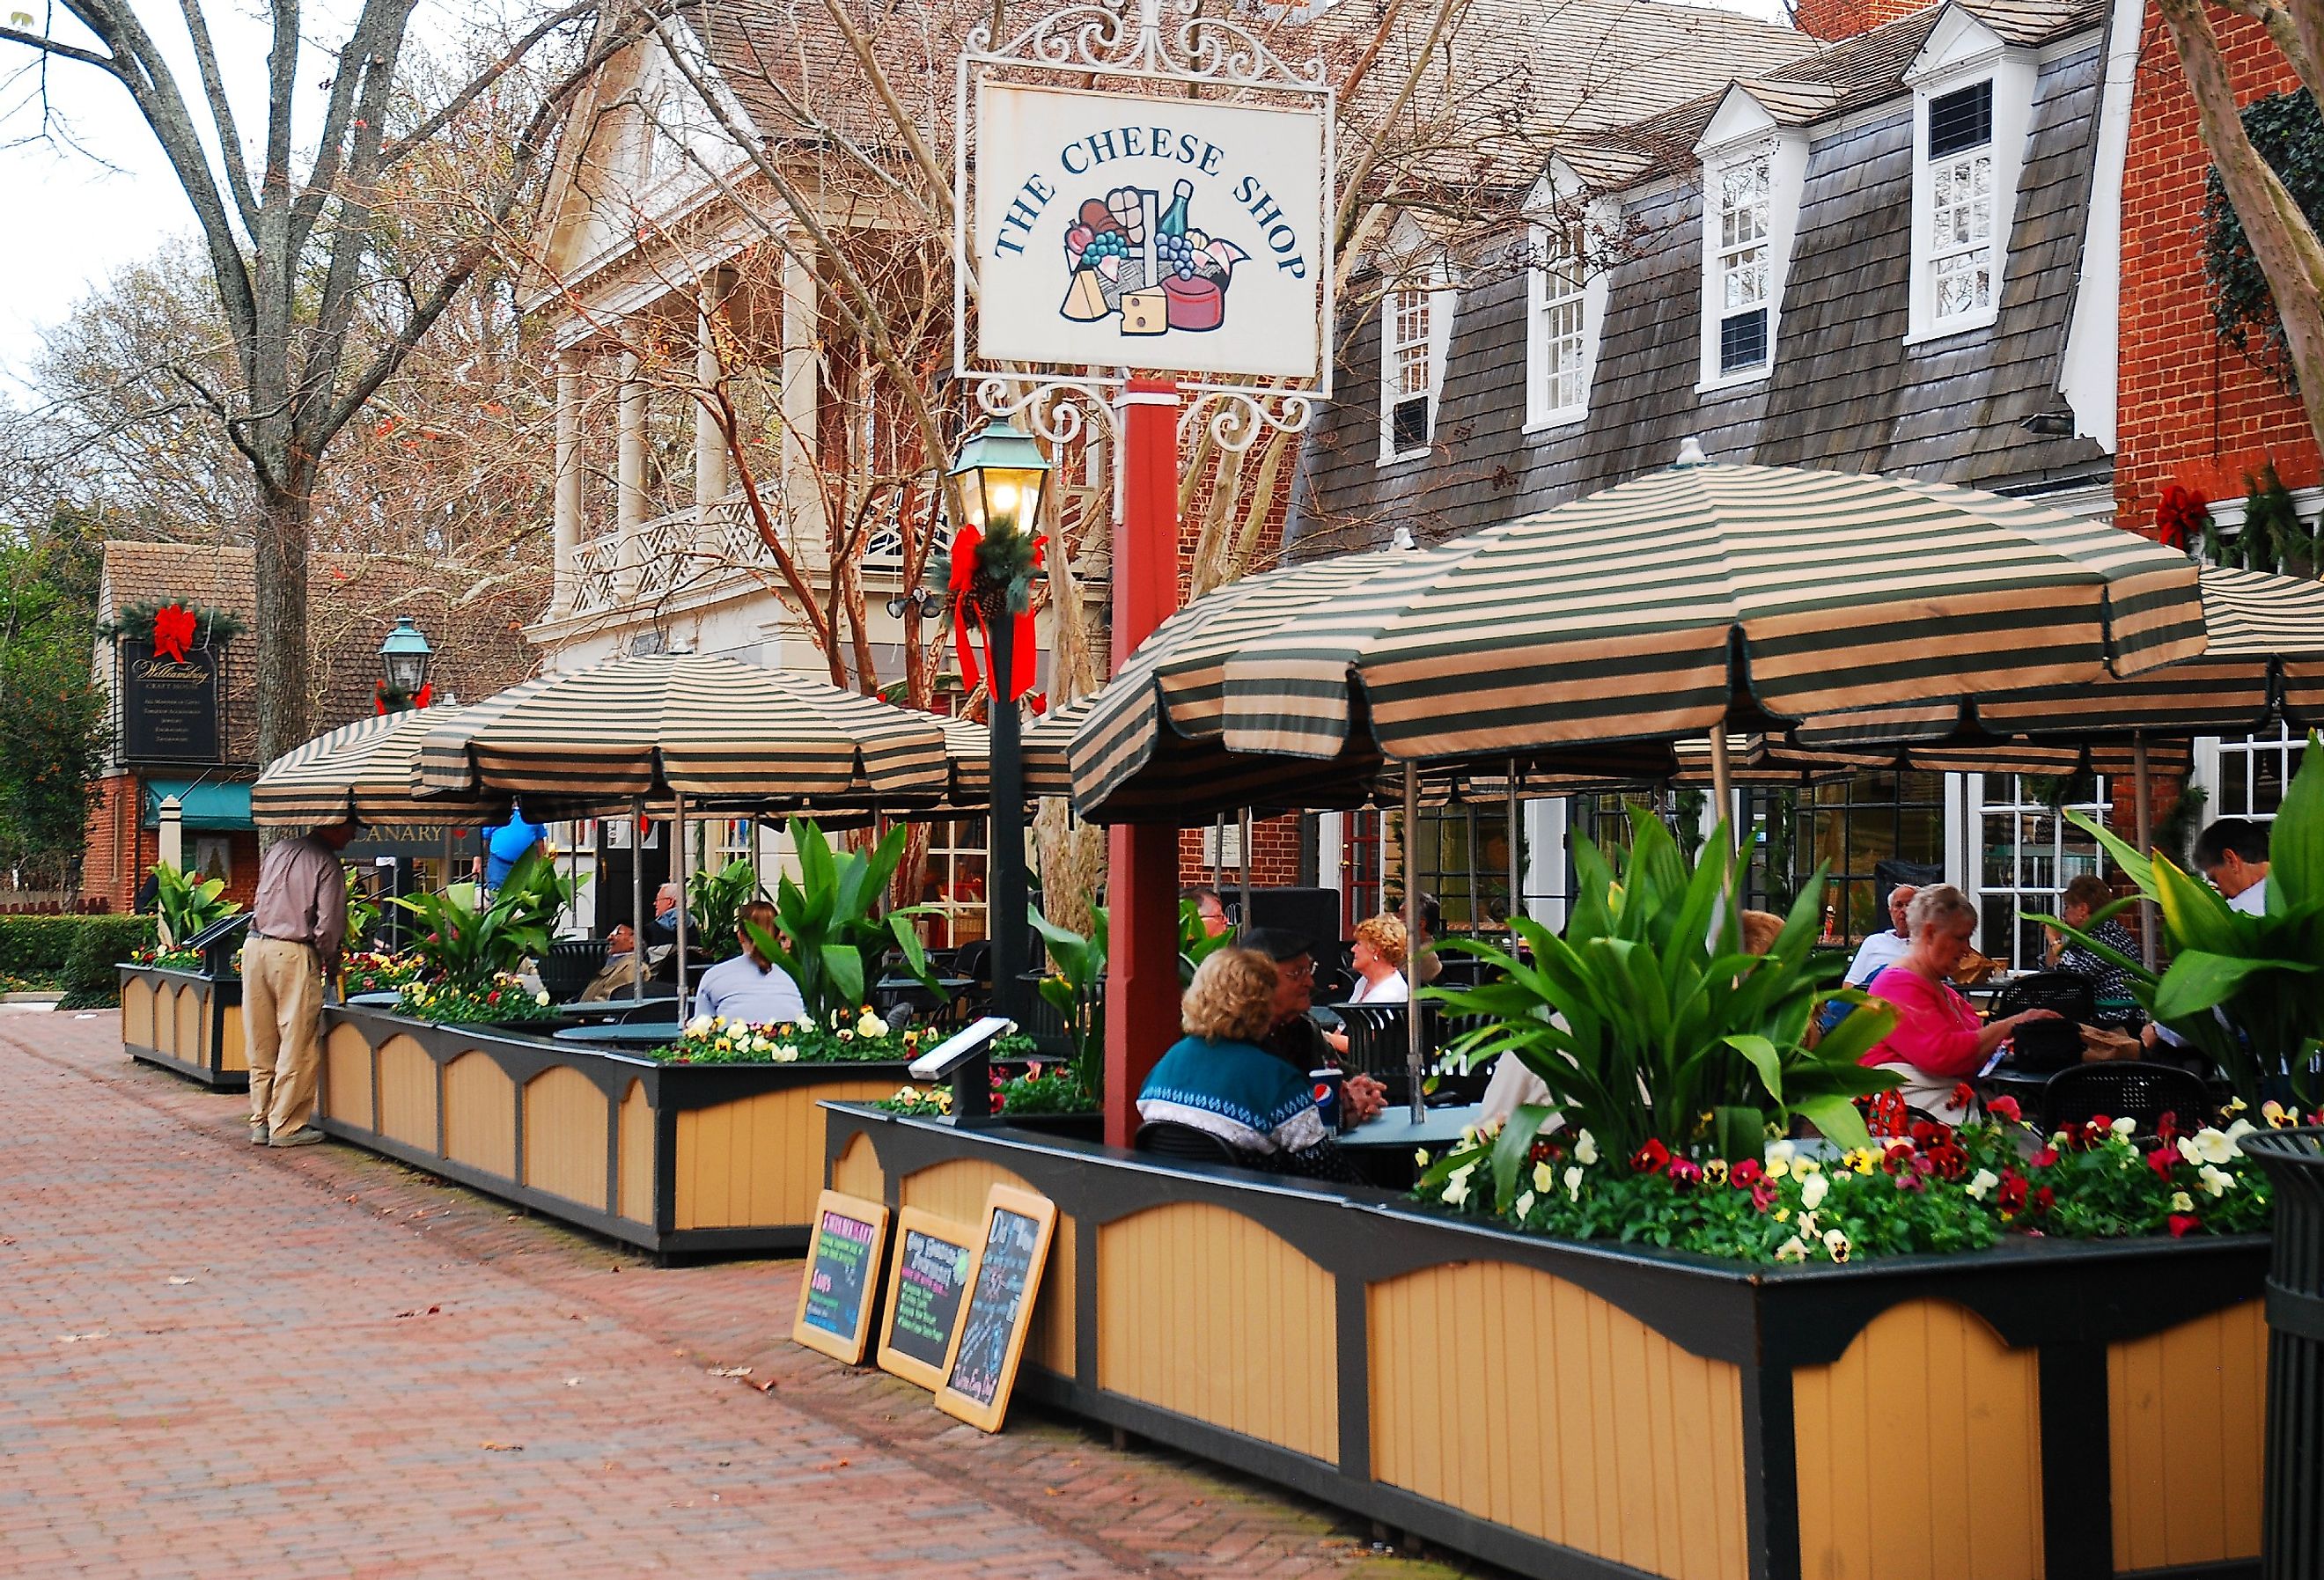 Folks enjoy an alfresco meal in Merchants Square, a retail and dining area near Colonial Williamsburg, Virginia. Image credit James Kirkikis via Shutterstock